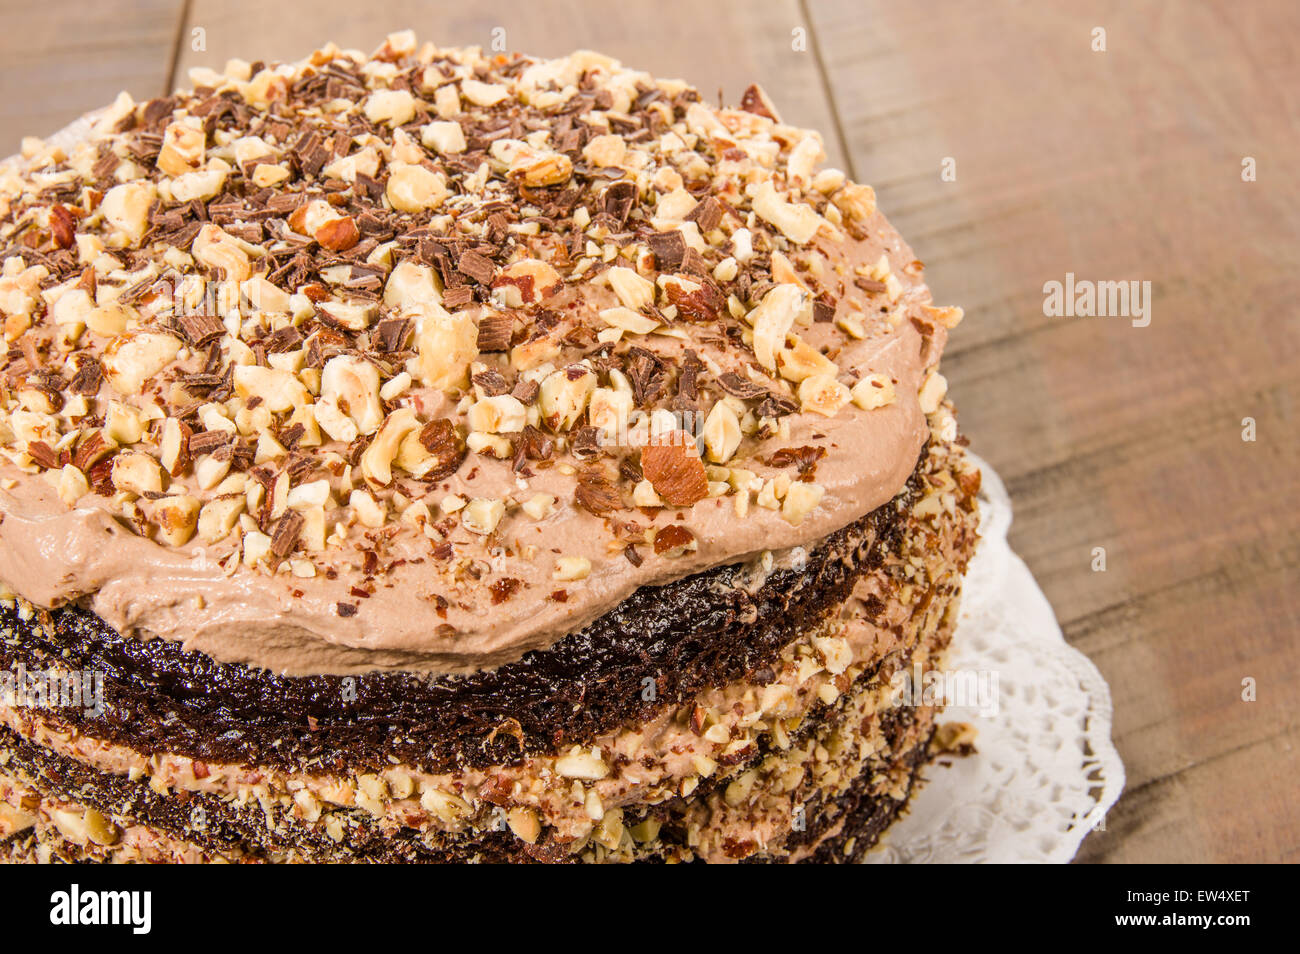 Fresh chocolate cake with icing or frosting and hazelnut topping Stock Photo